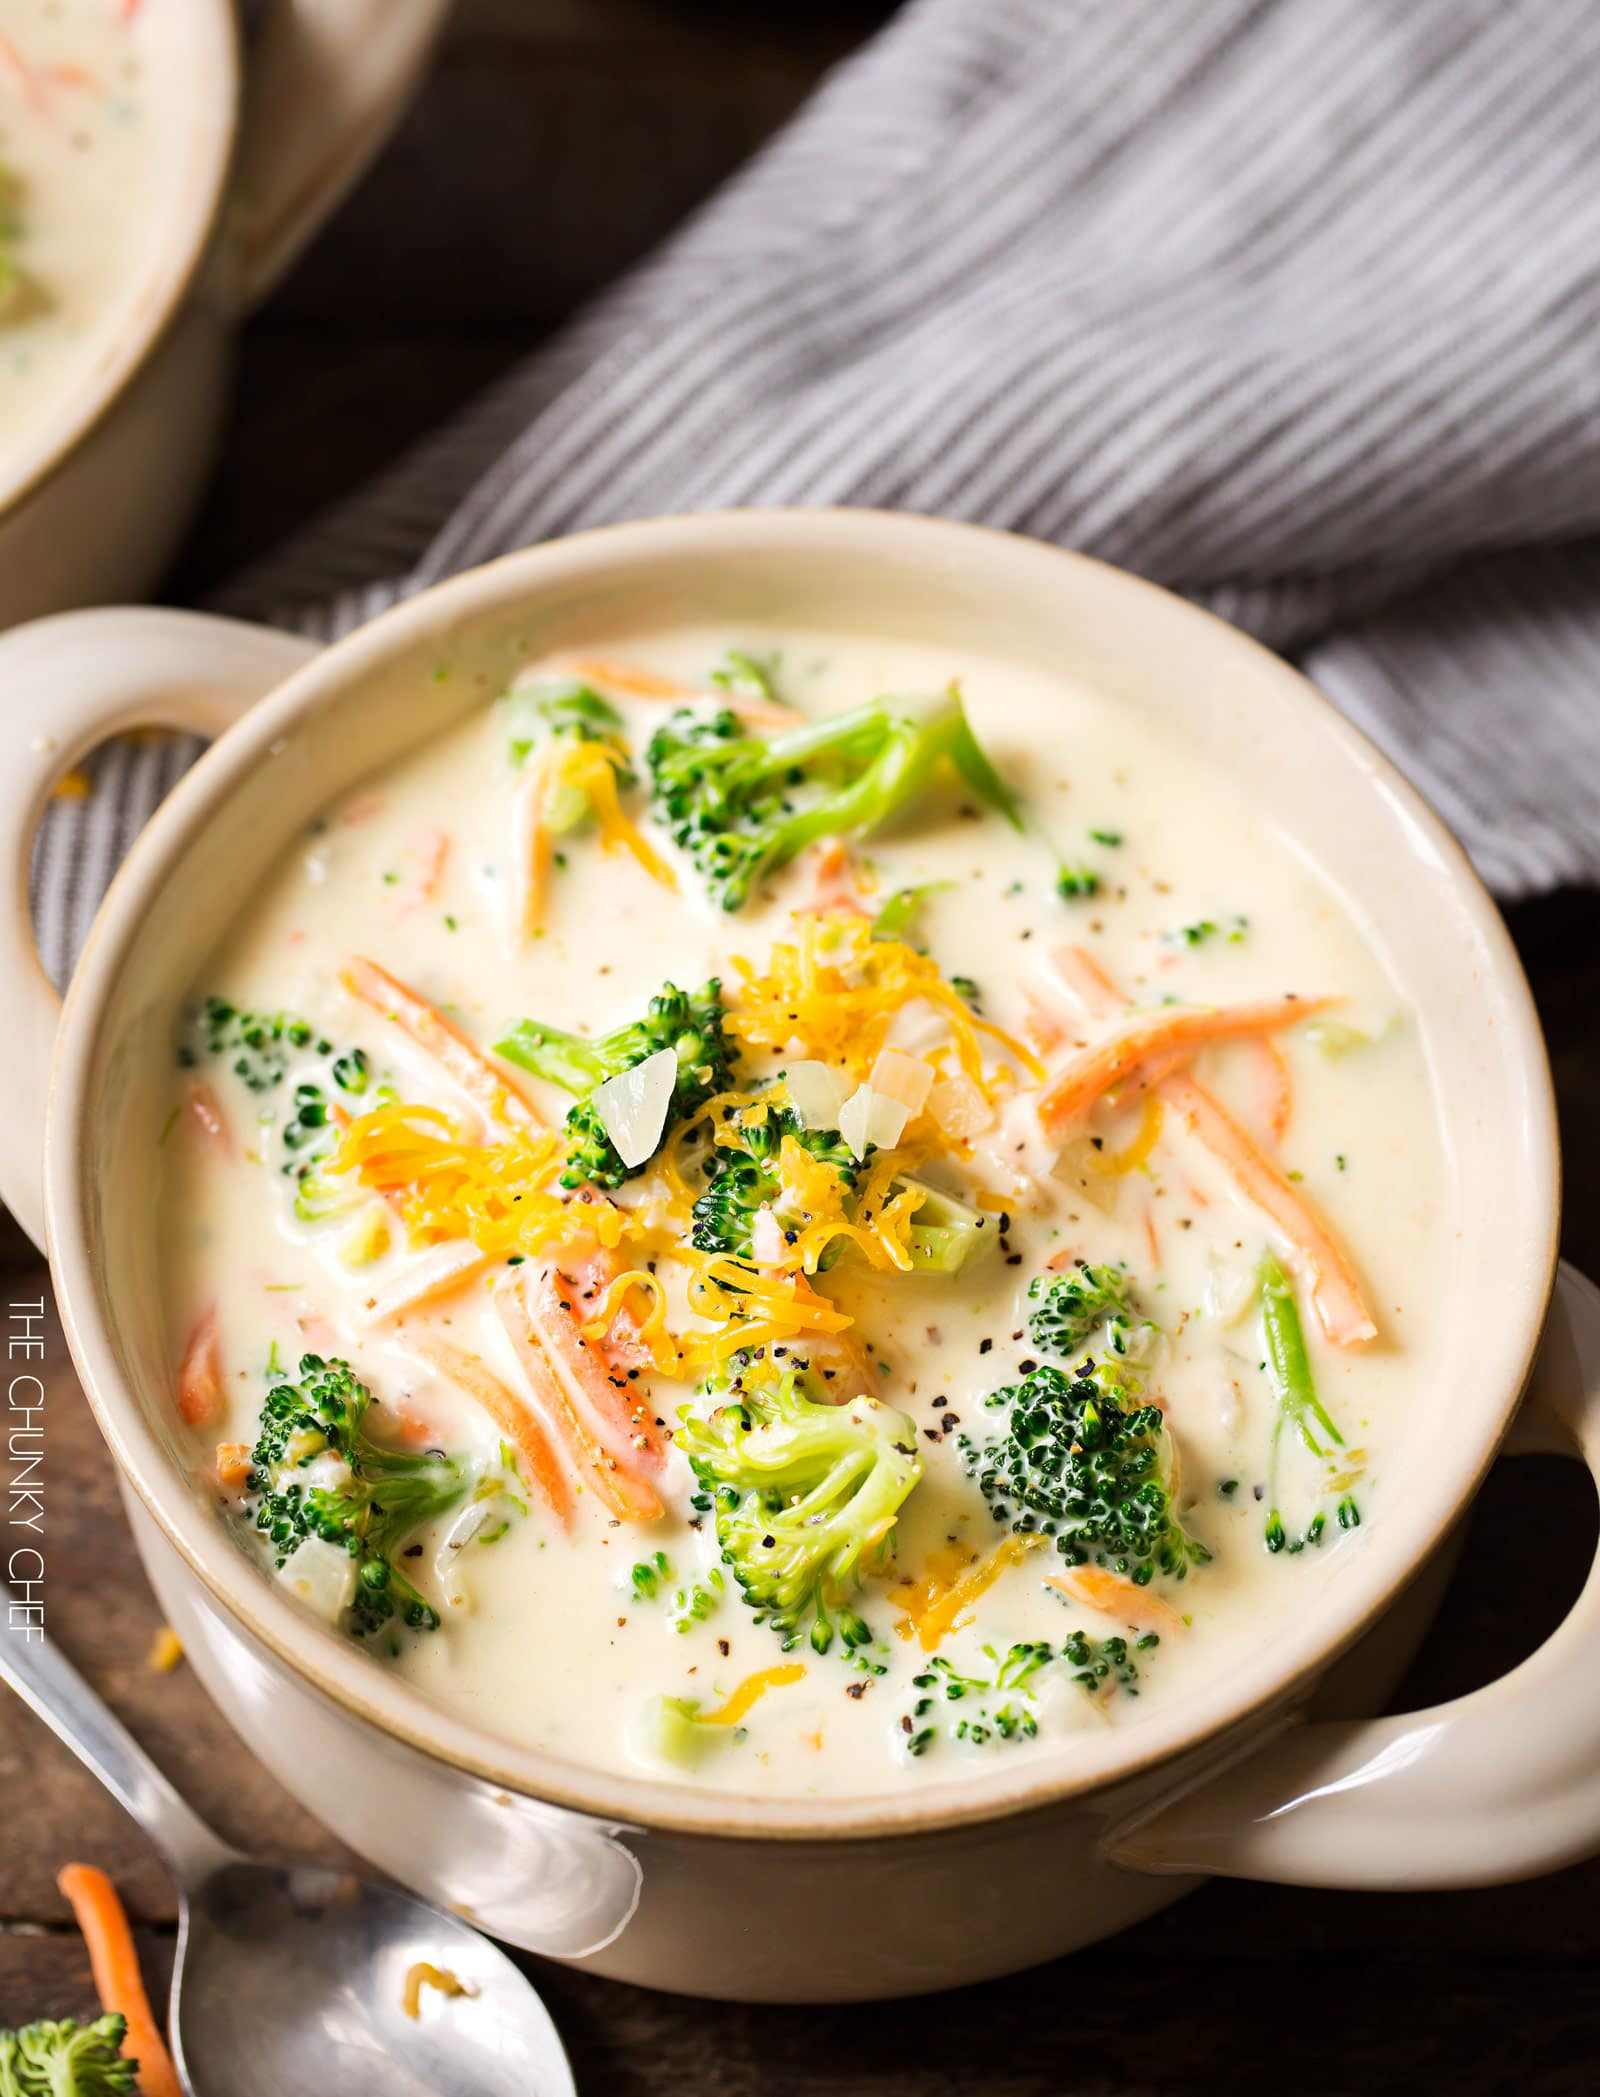 Broccoli Cheese Soup Recipe
 Copycat 30 Minute Broccoli Cheese Soup The Chunky Chef